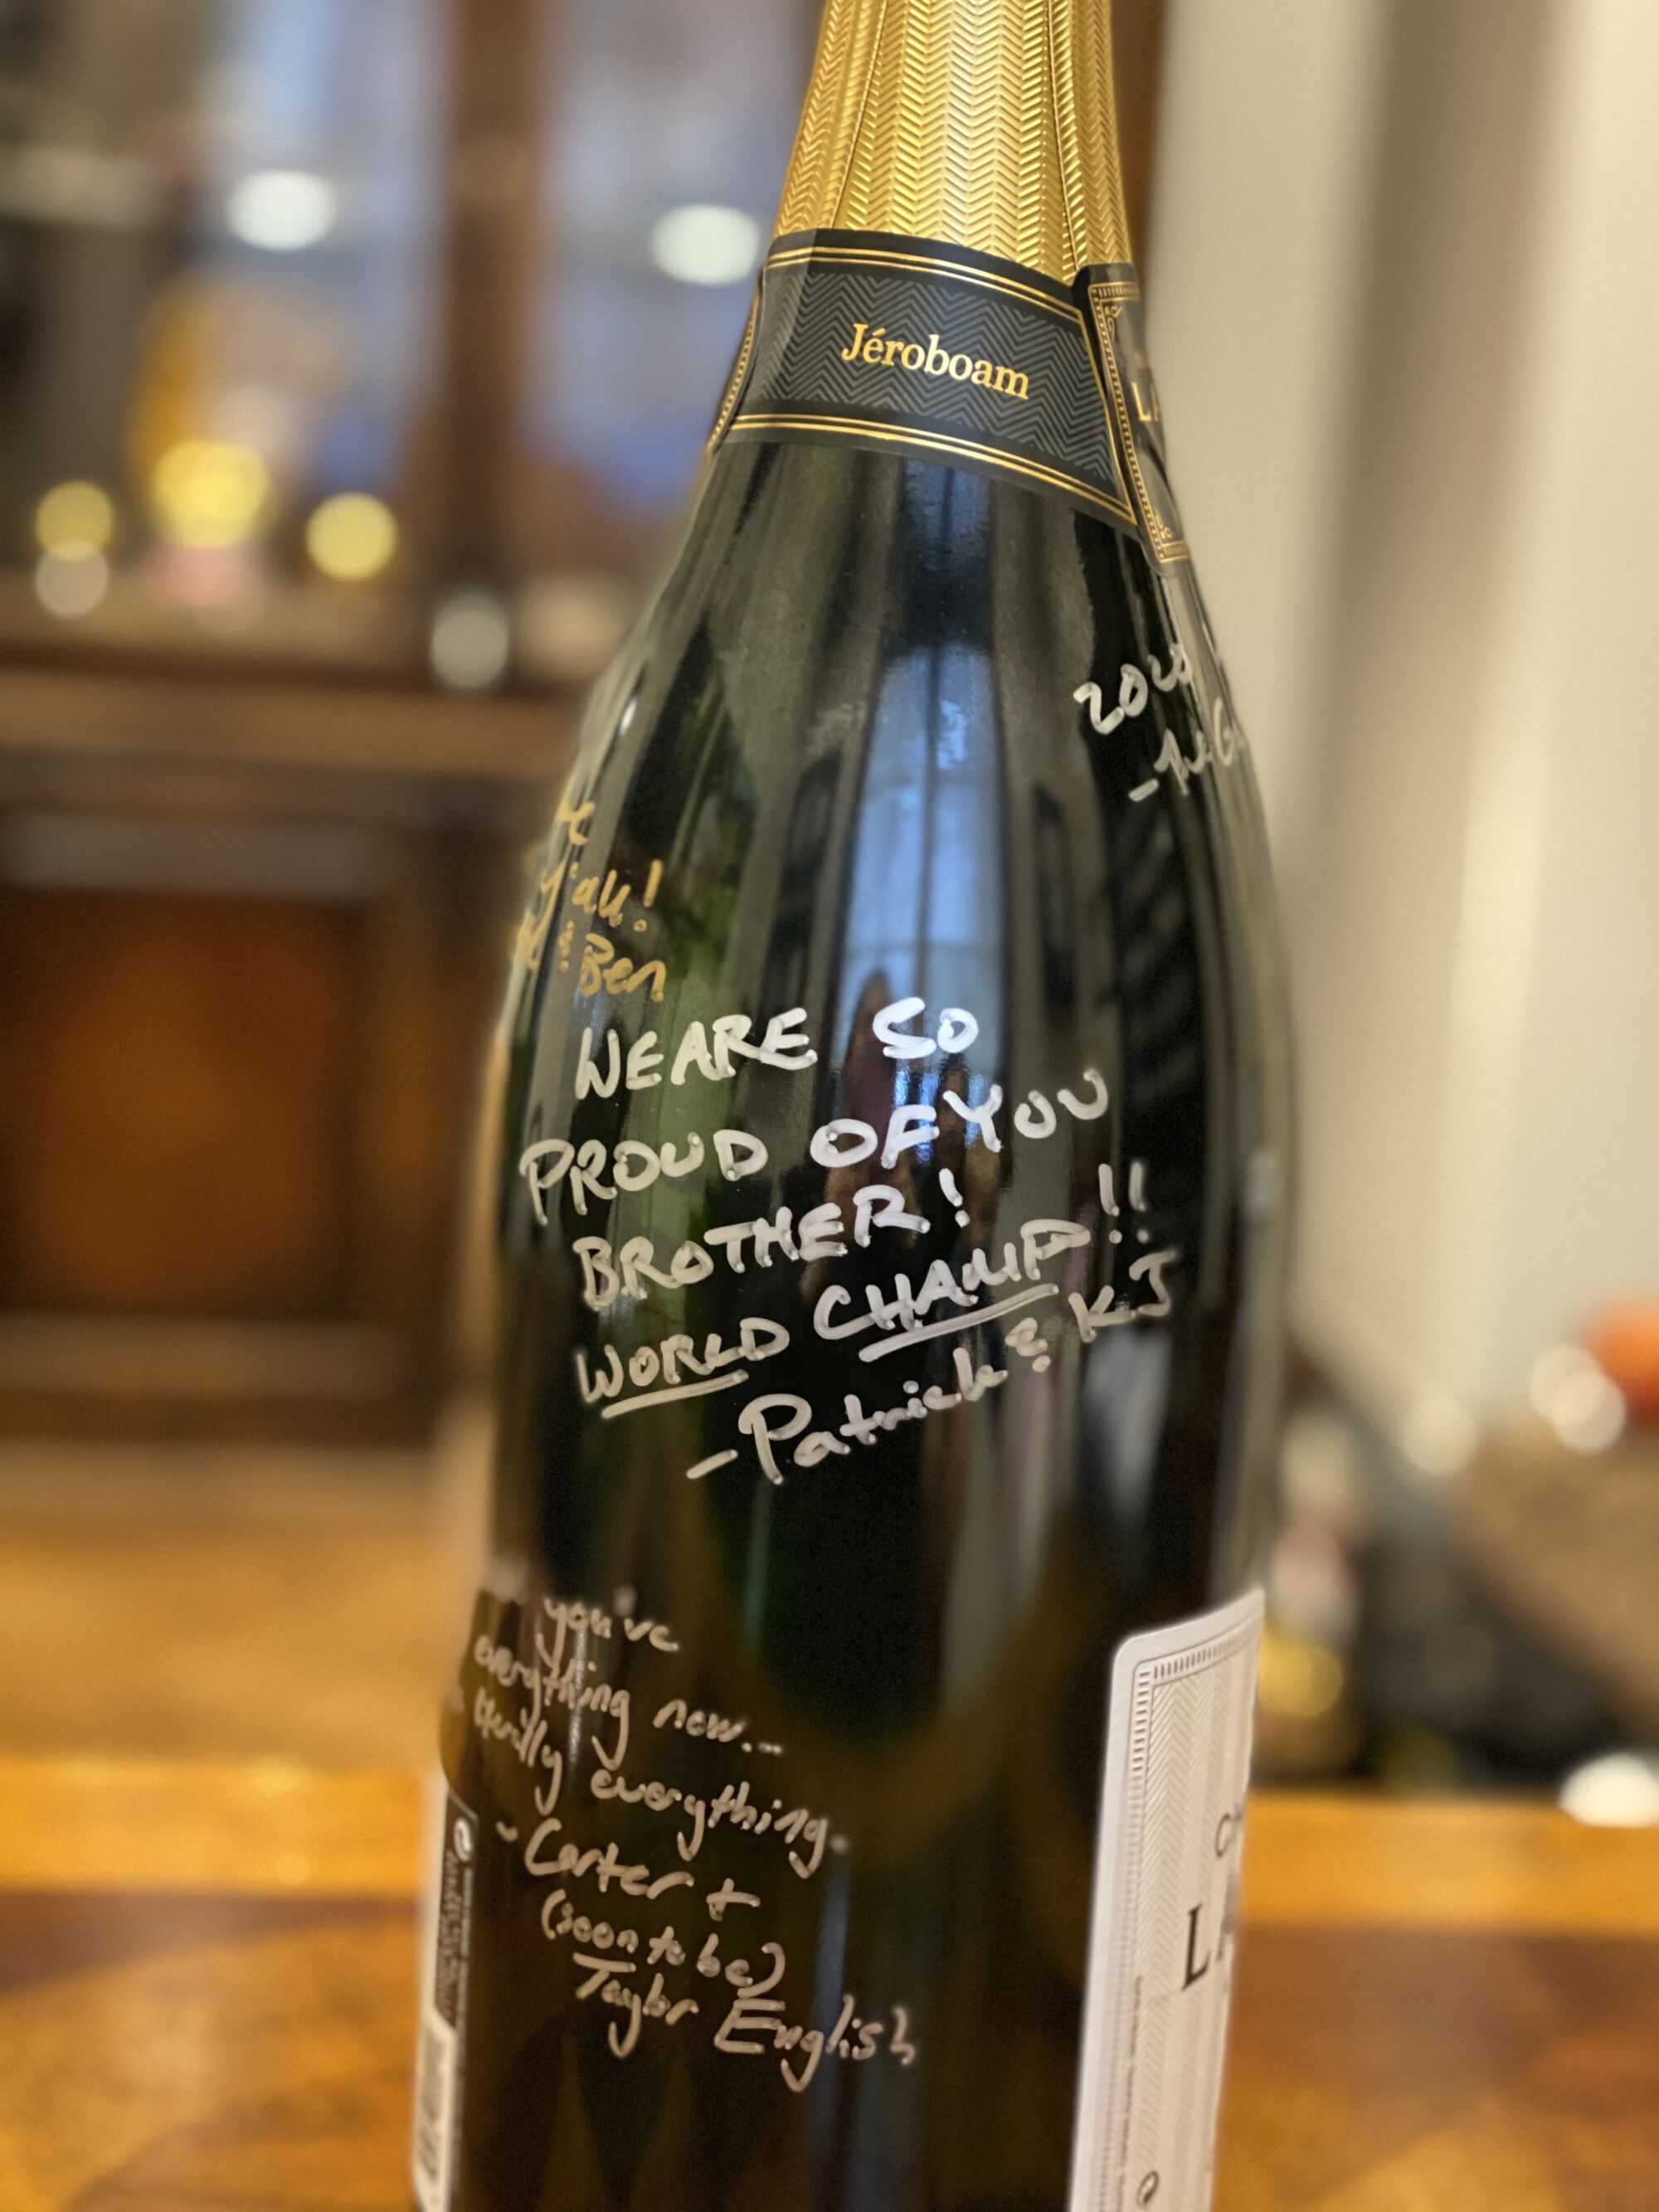 An unopened bottle of champagne signed by friends with congratulatory messages  